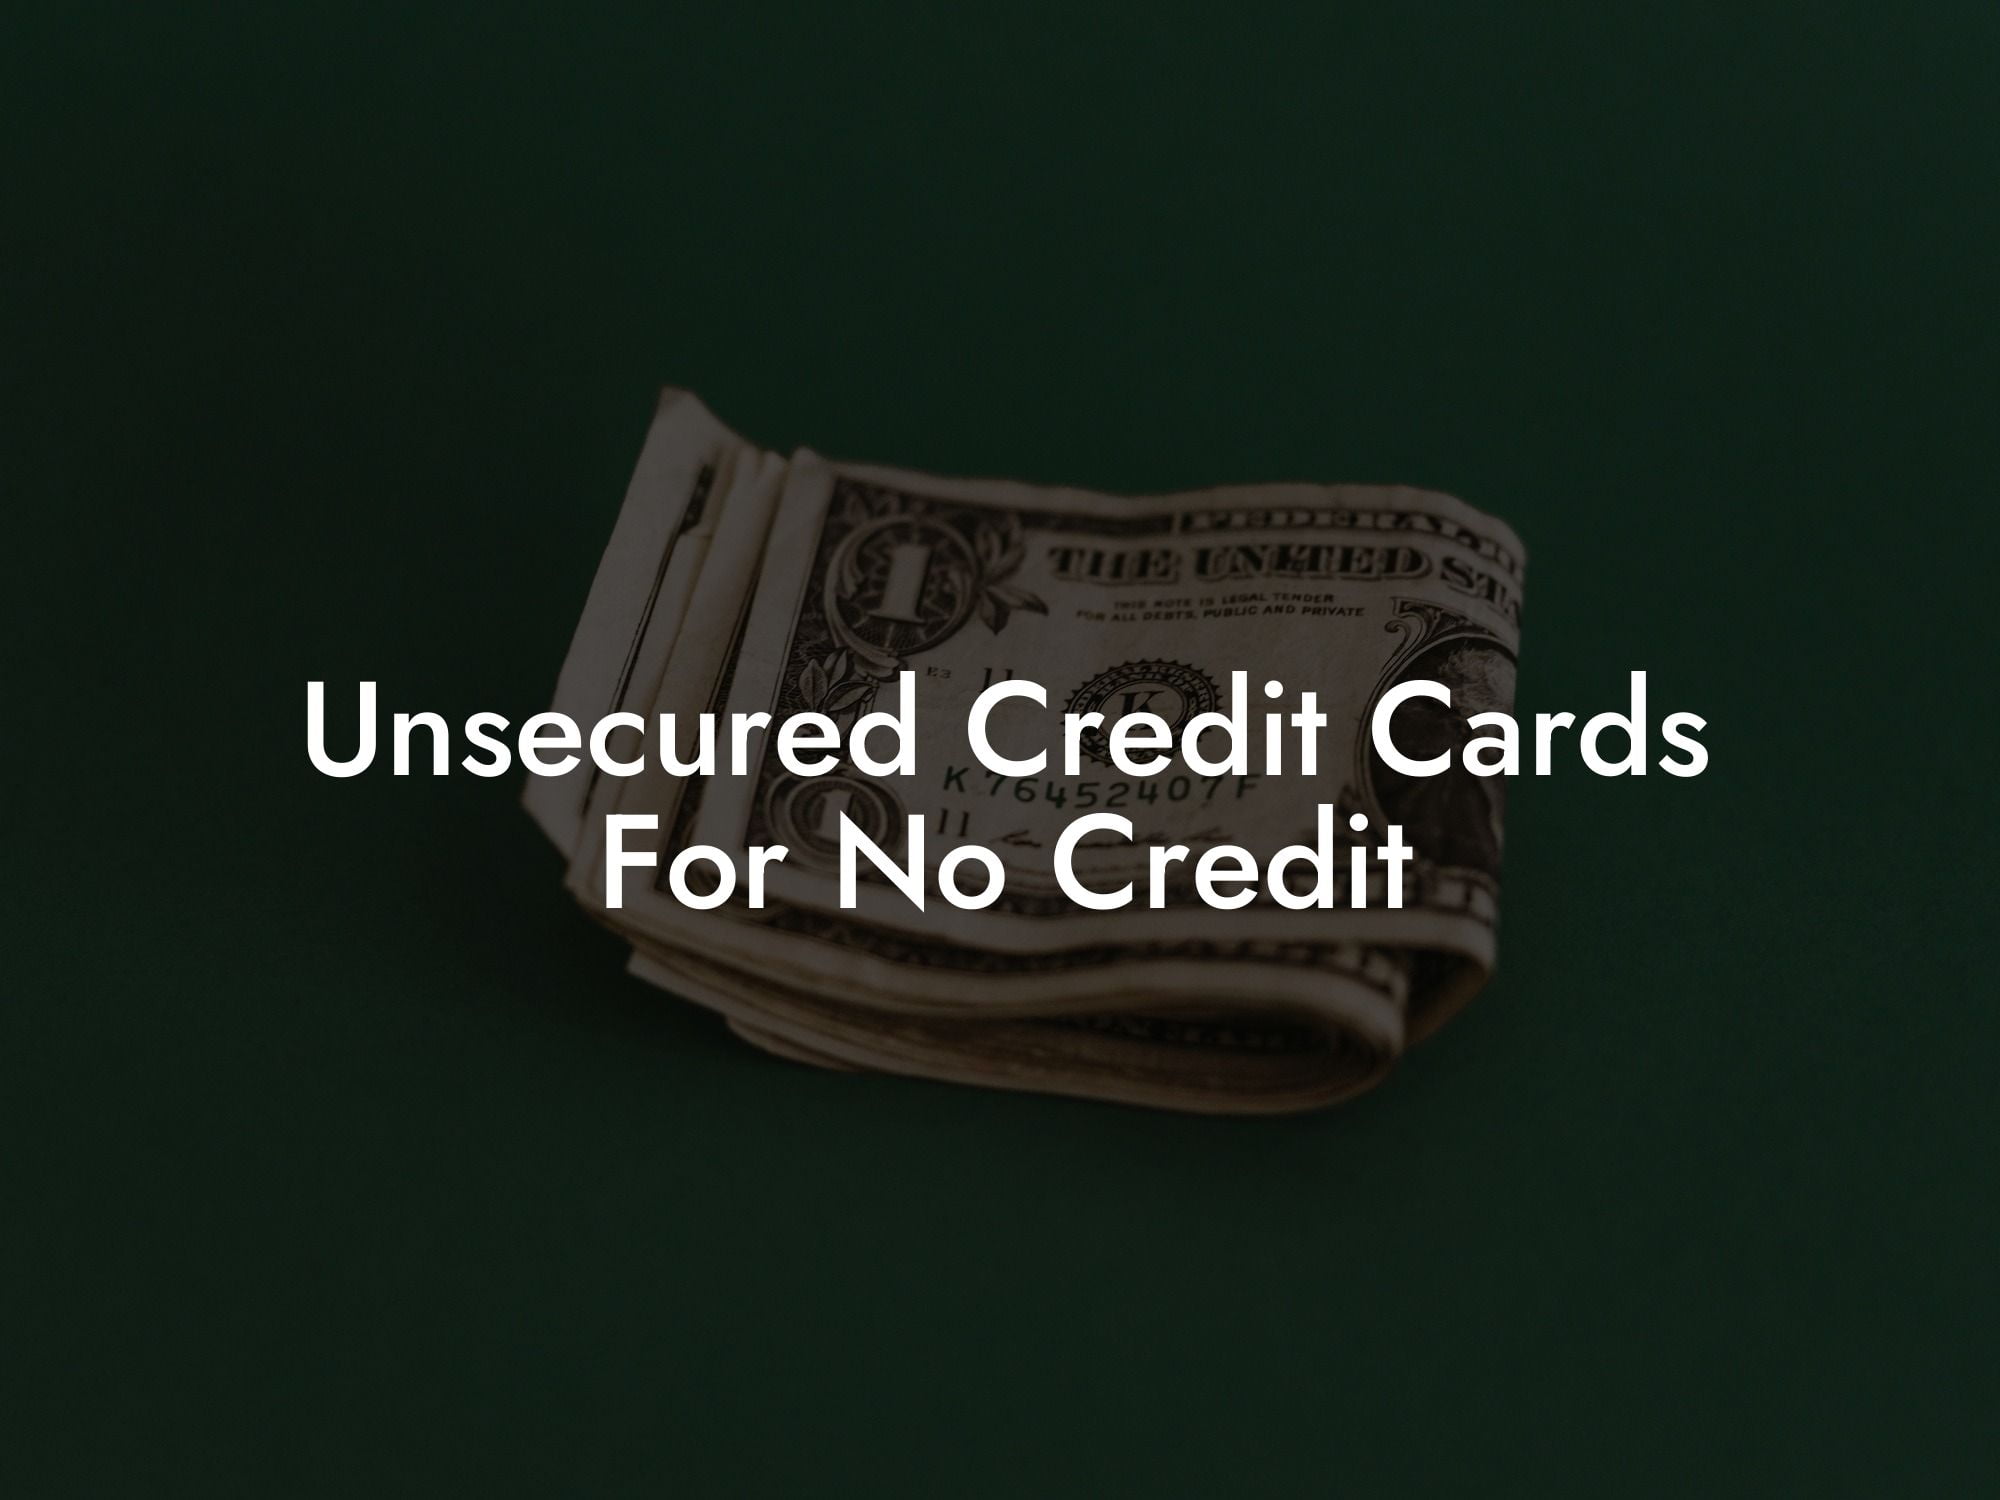 Unsecured Credit Cards For No Credit